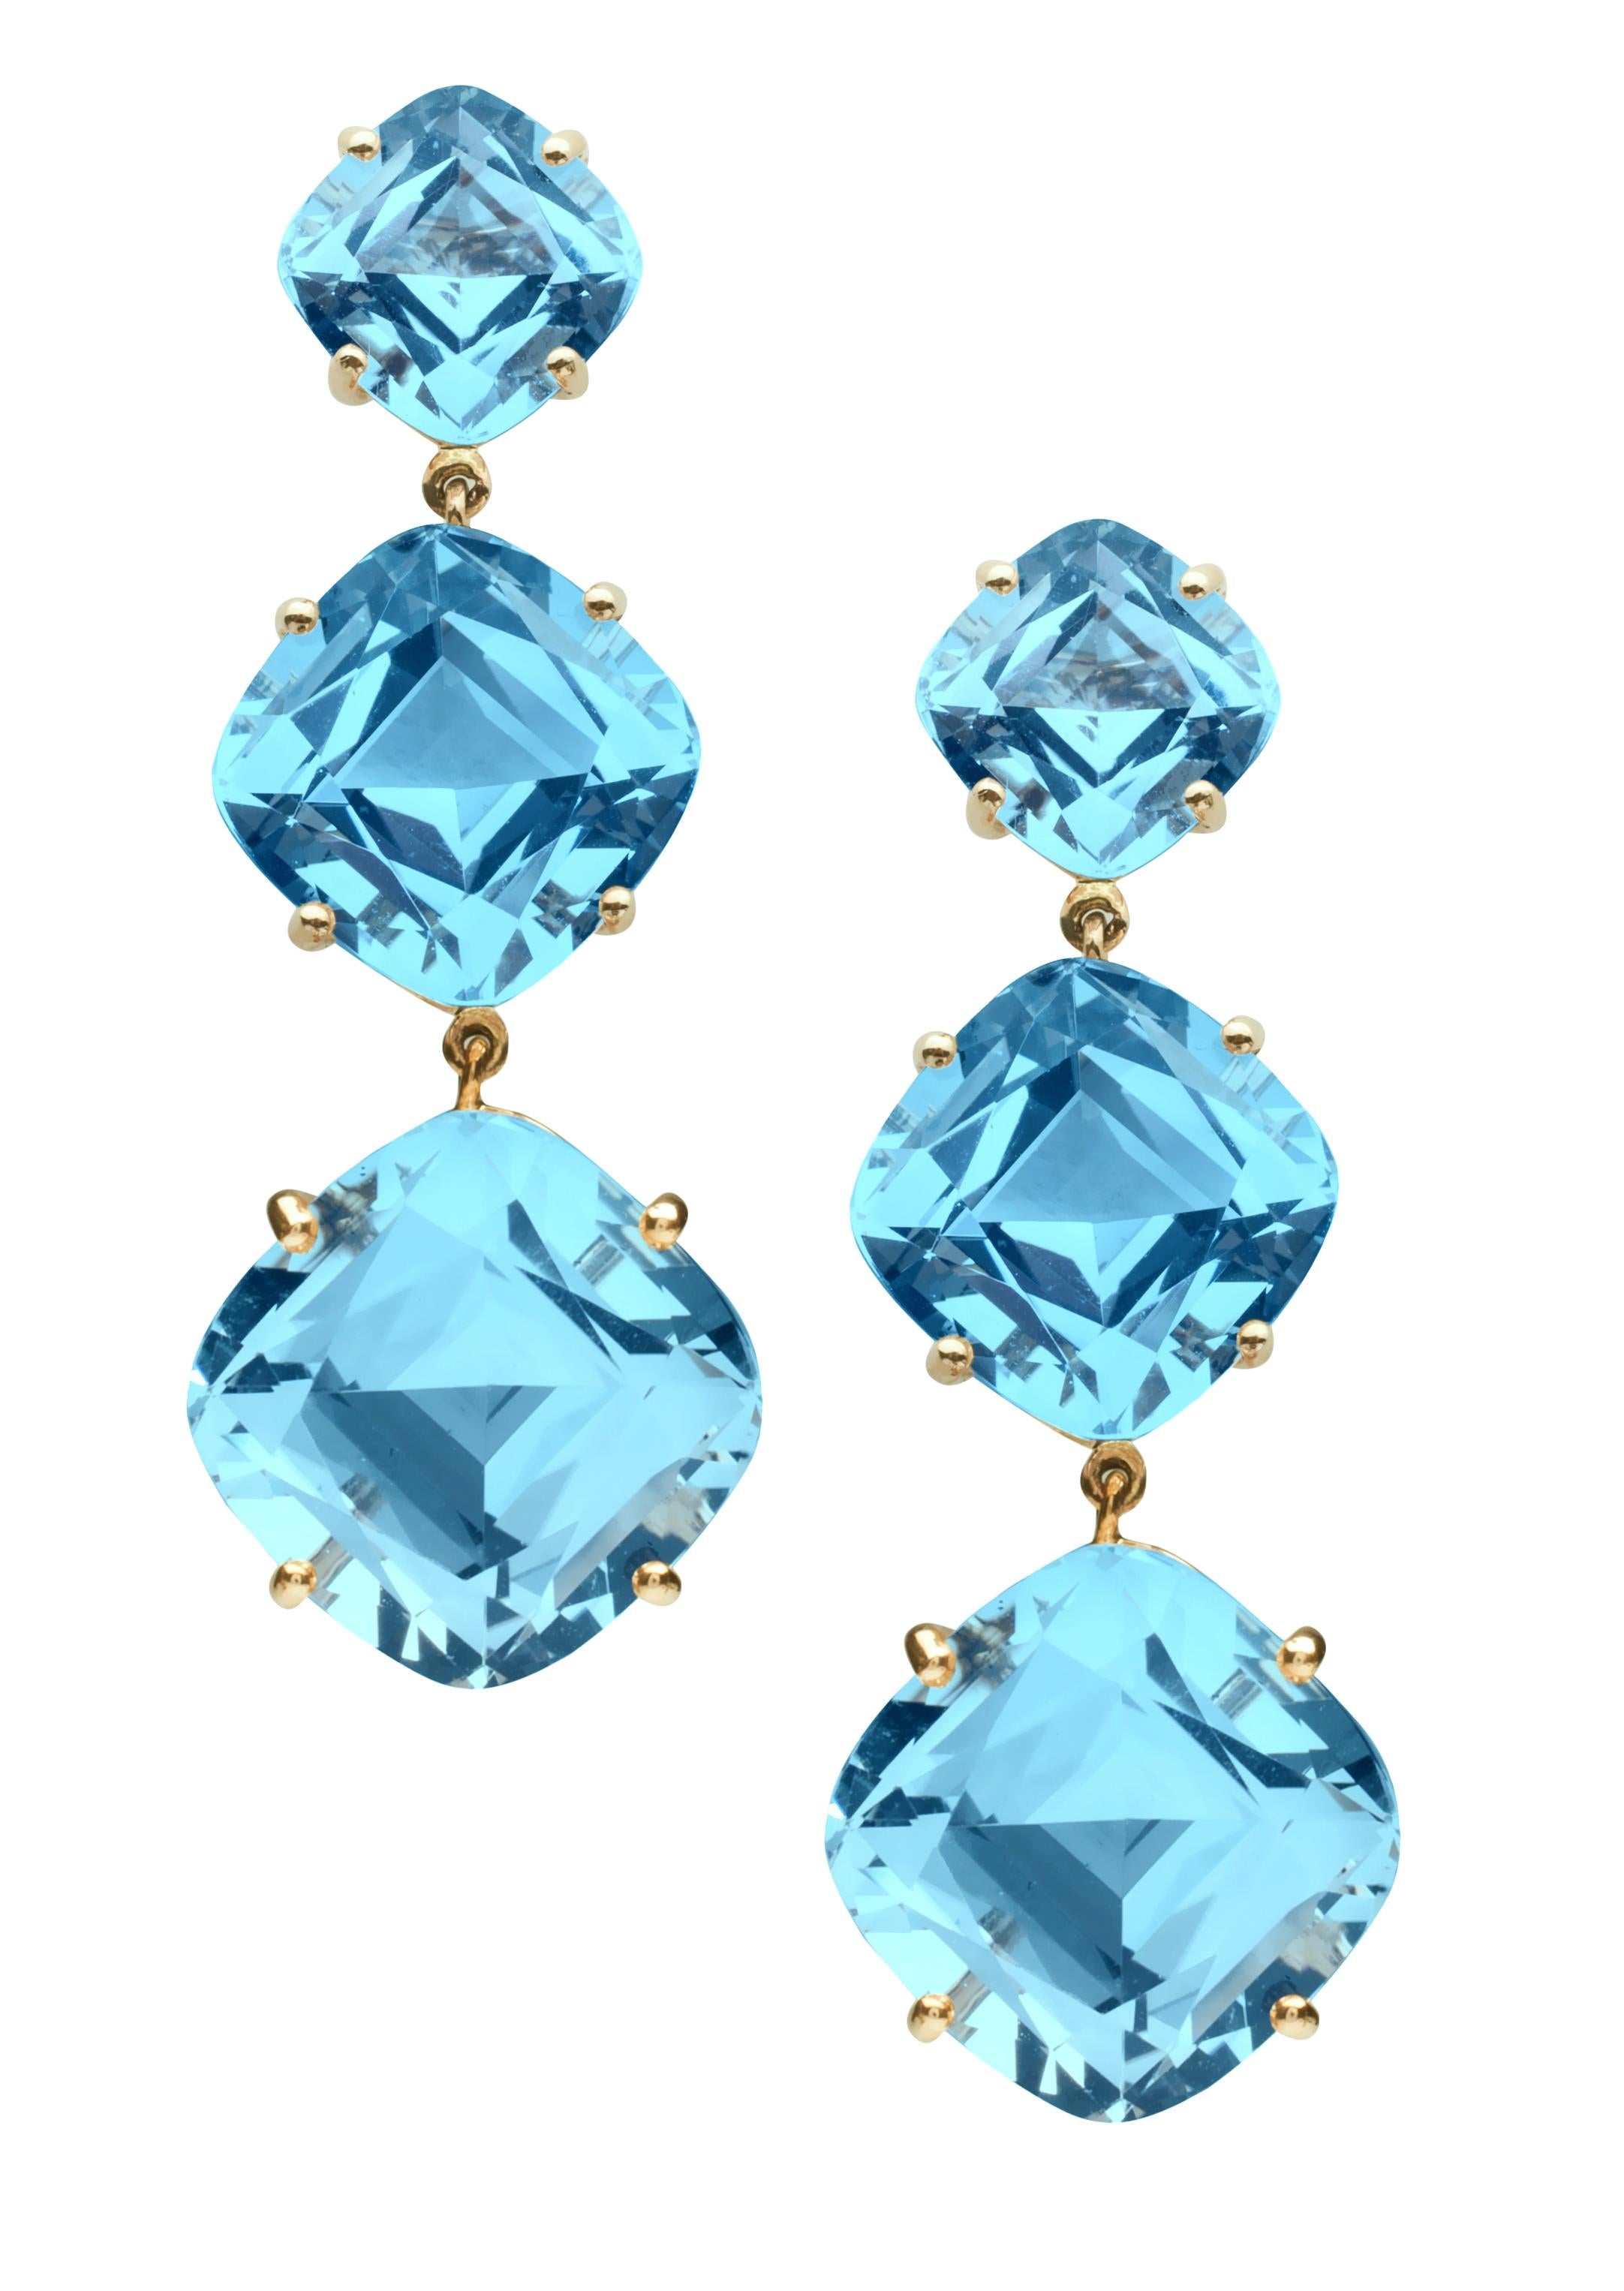 Blue Topaz Cushion Earrings in 18K Yellow Gold, from 'Gossip' Collection

Stone Size: 9 x 9, 12 x 12, 14 x 14 mm

